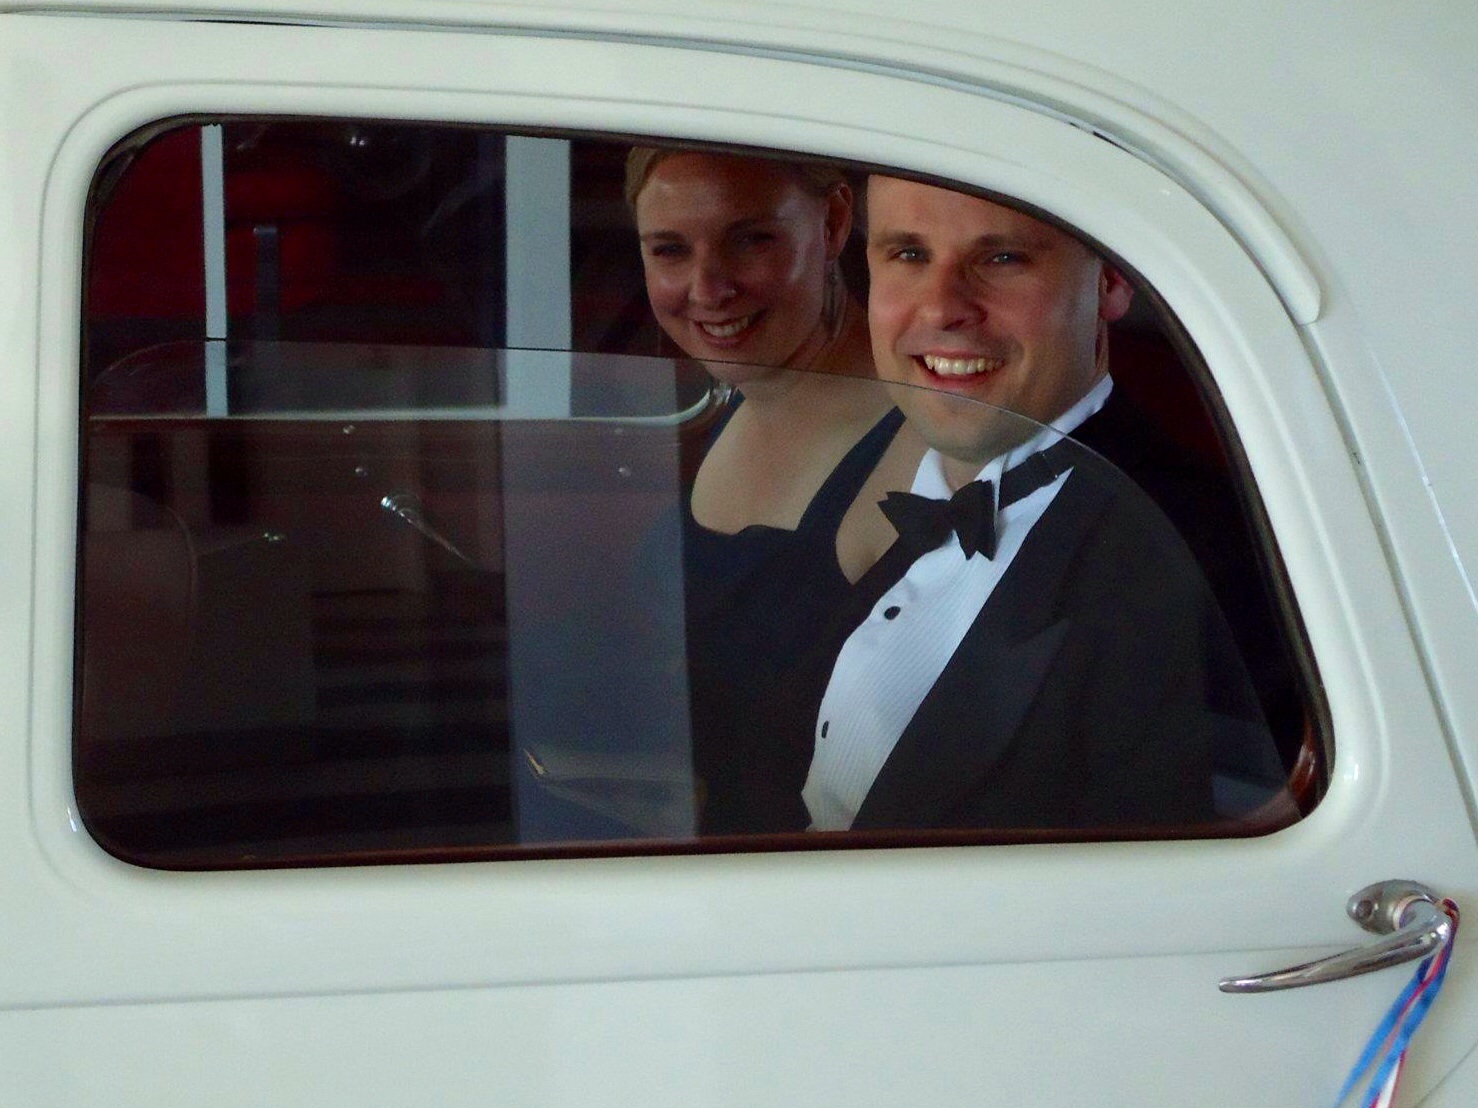 Producer Lincoln Fenner and his wife Natasha Fenner arriving by vintage car to the Red Carpet Opening Gala of the BOFA Film Festival.